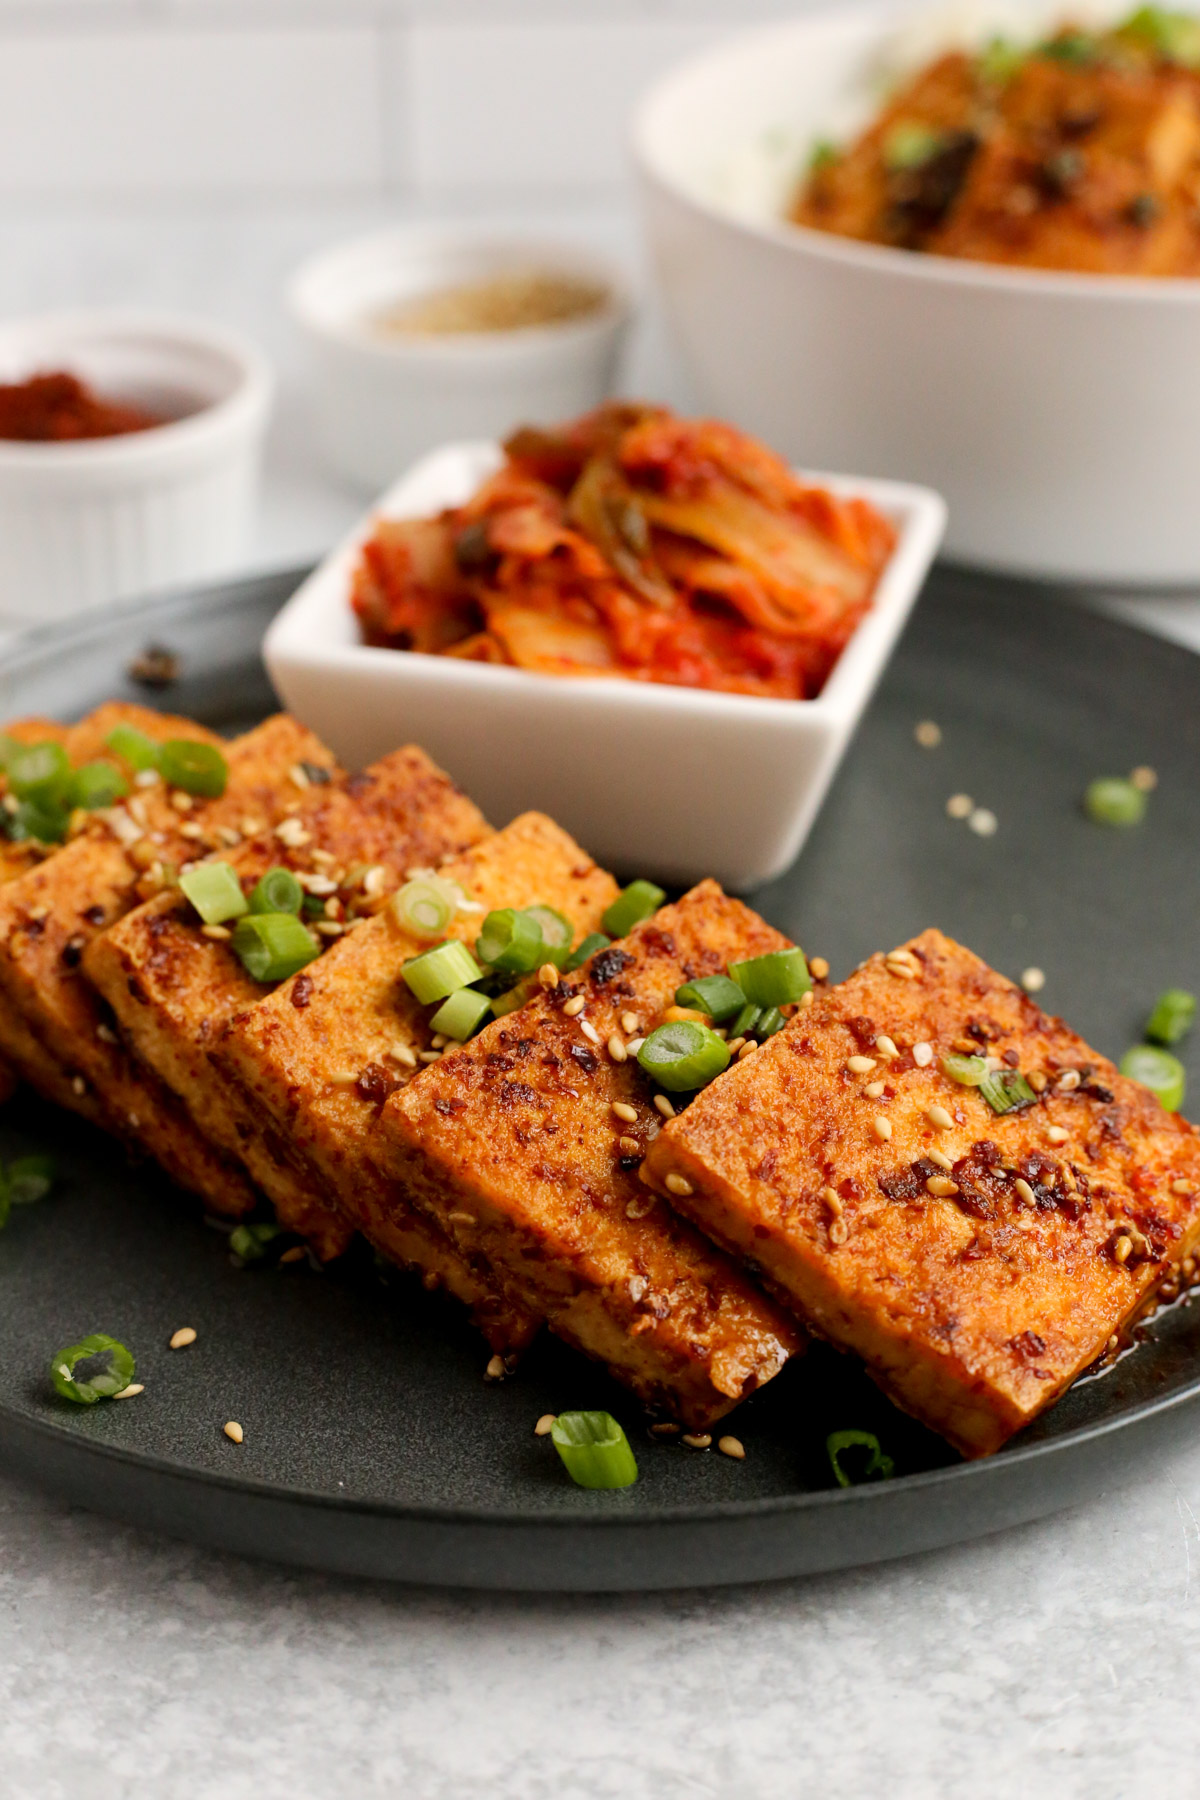 A close shot of dubu jorim, Korean braised tofu, stacked and served on a dark ceramic dish with kimchi, garnishes, and a rice bowl visible in the background